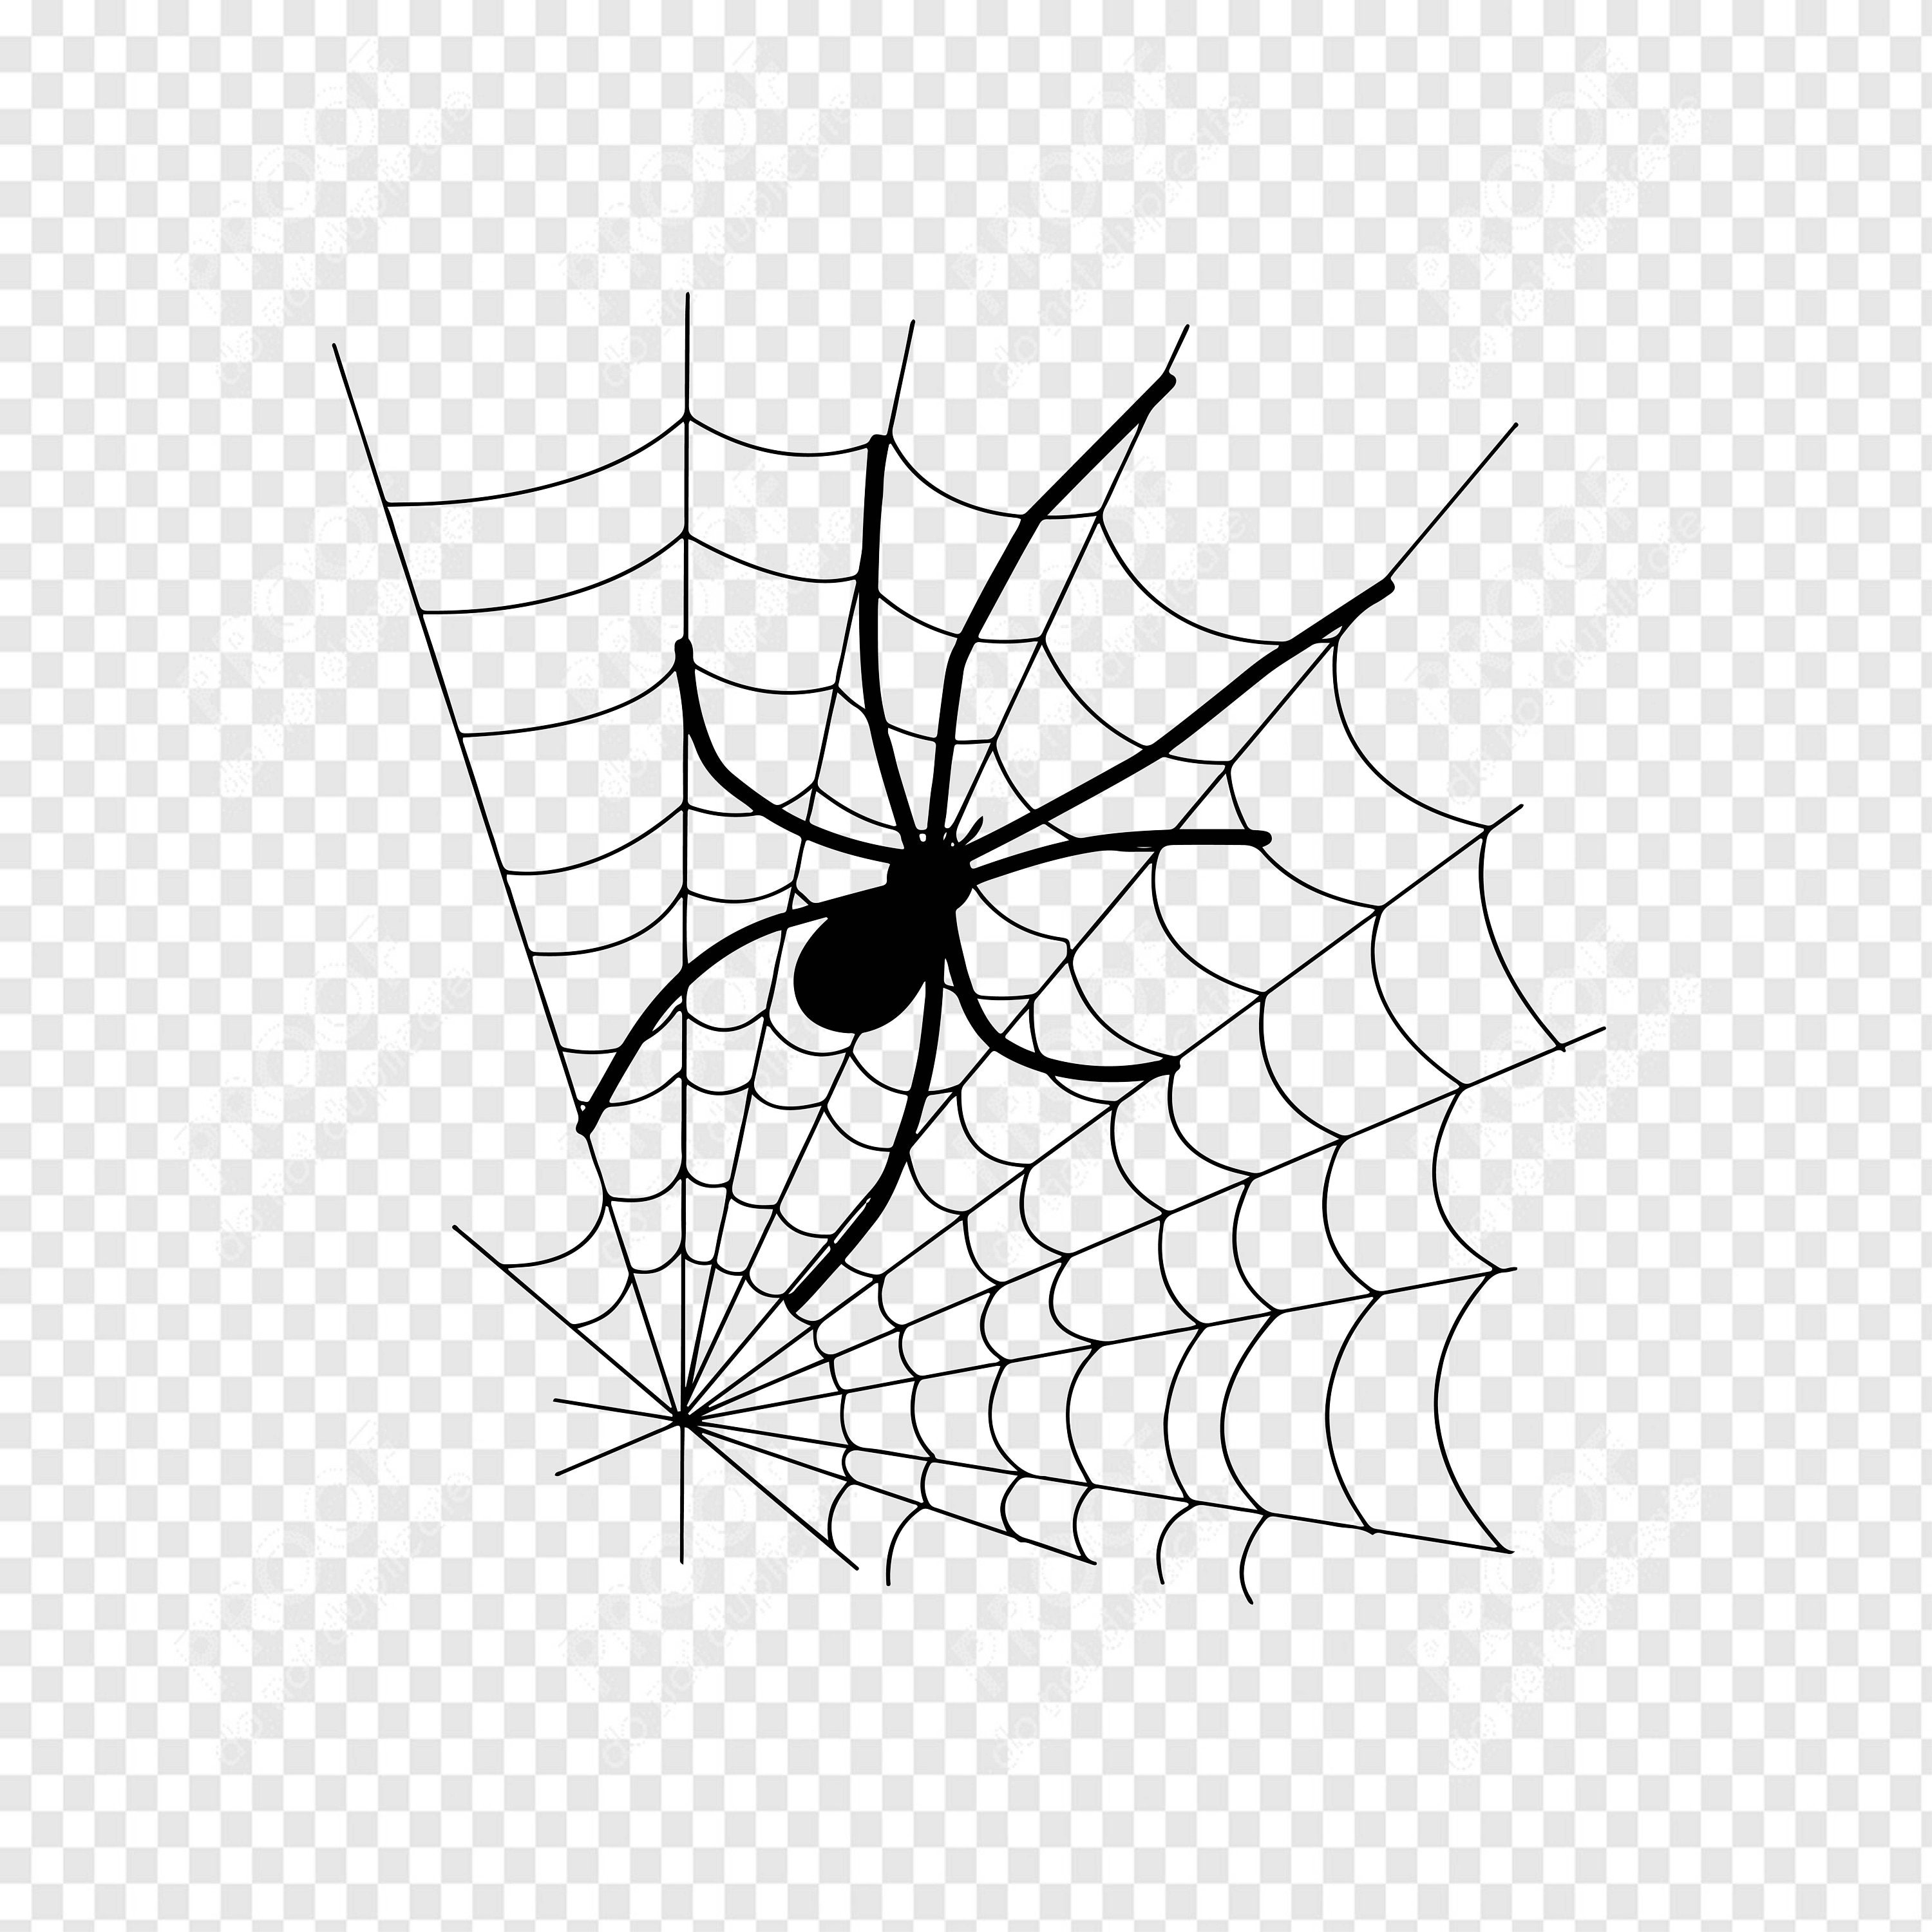 Spider SVG png Halloween SVG Vector Files Spiderweb SVG Files Dxf Cute Spiderweb Svg Spider Web Cut Files